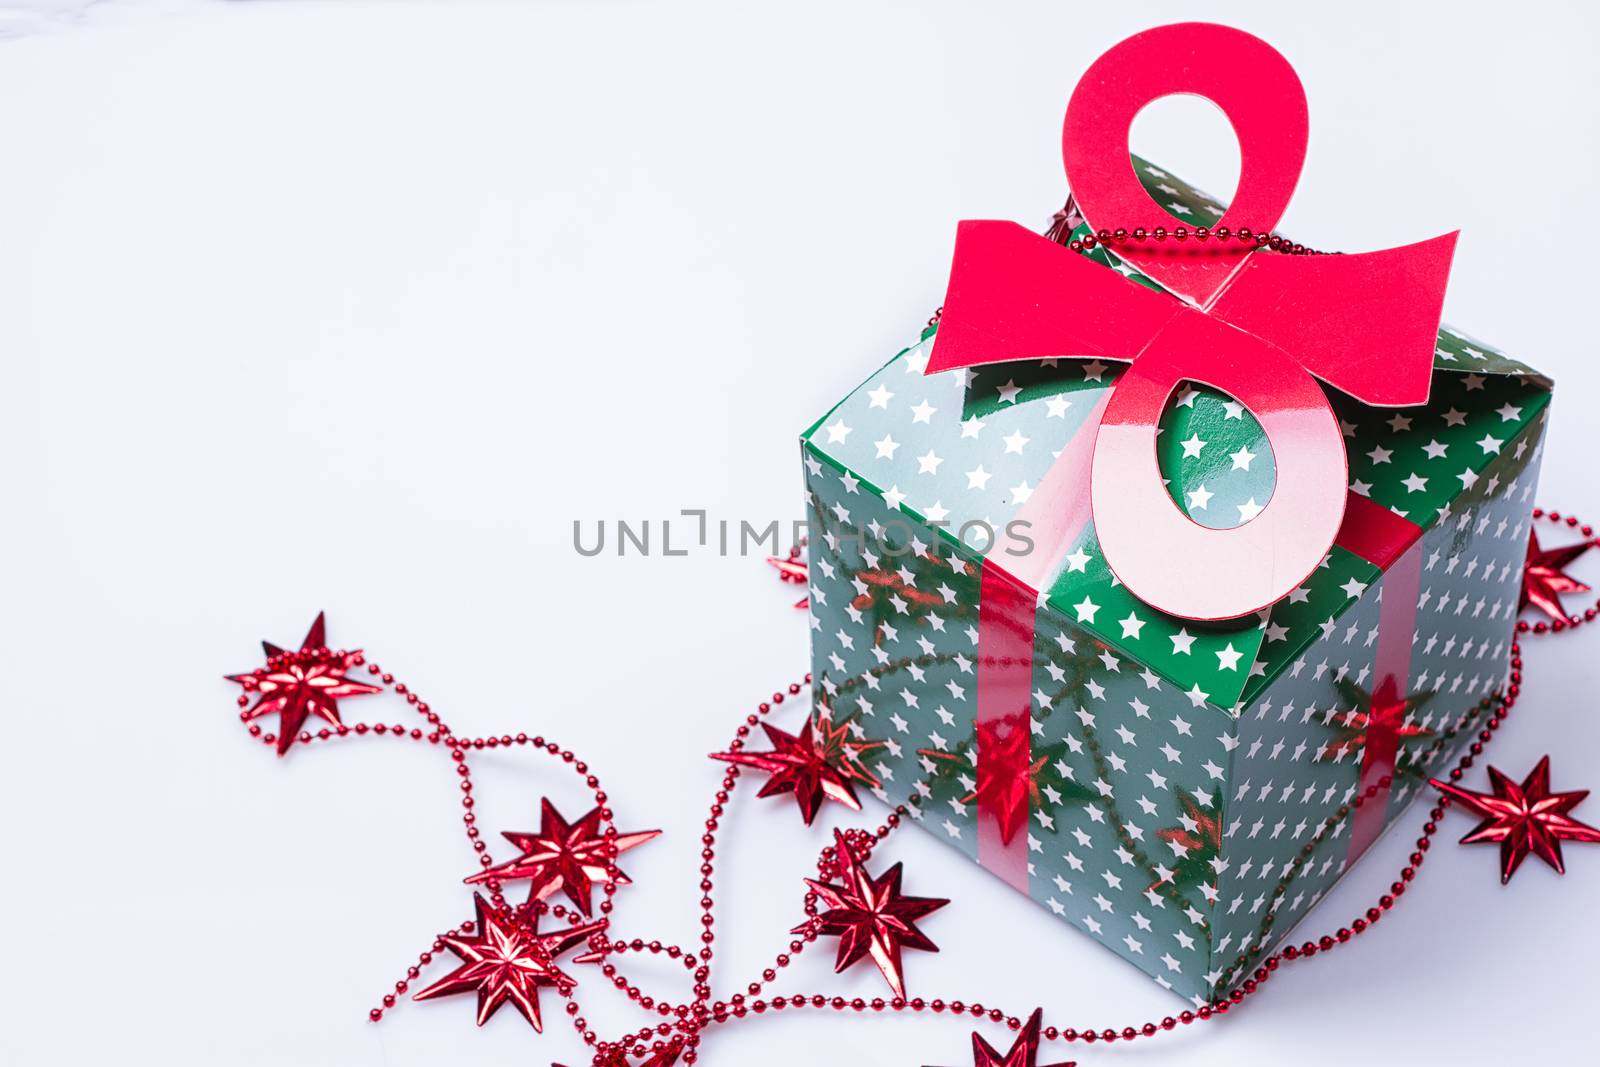 green gift box on the white background.